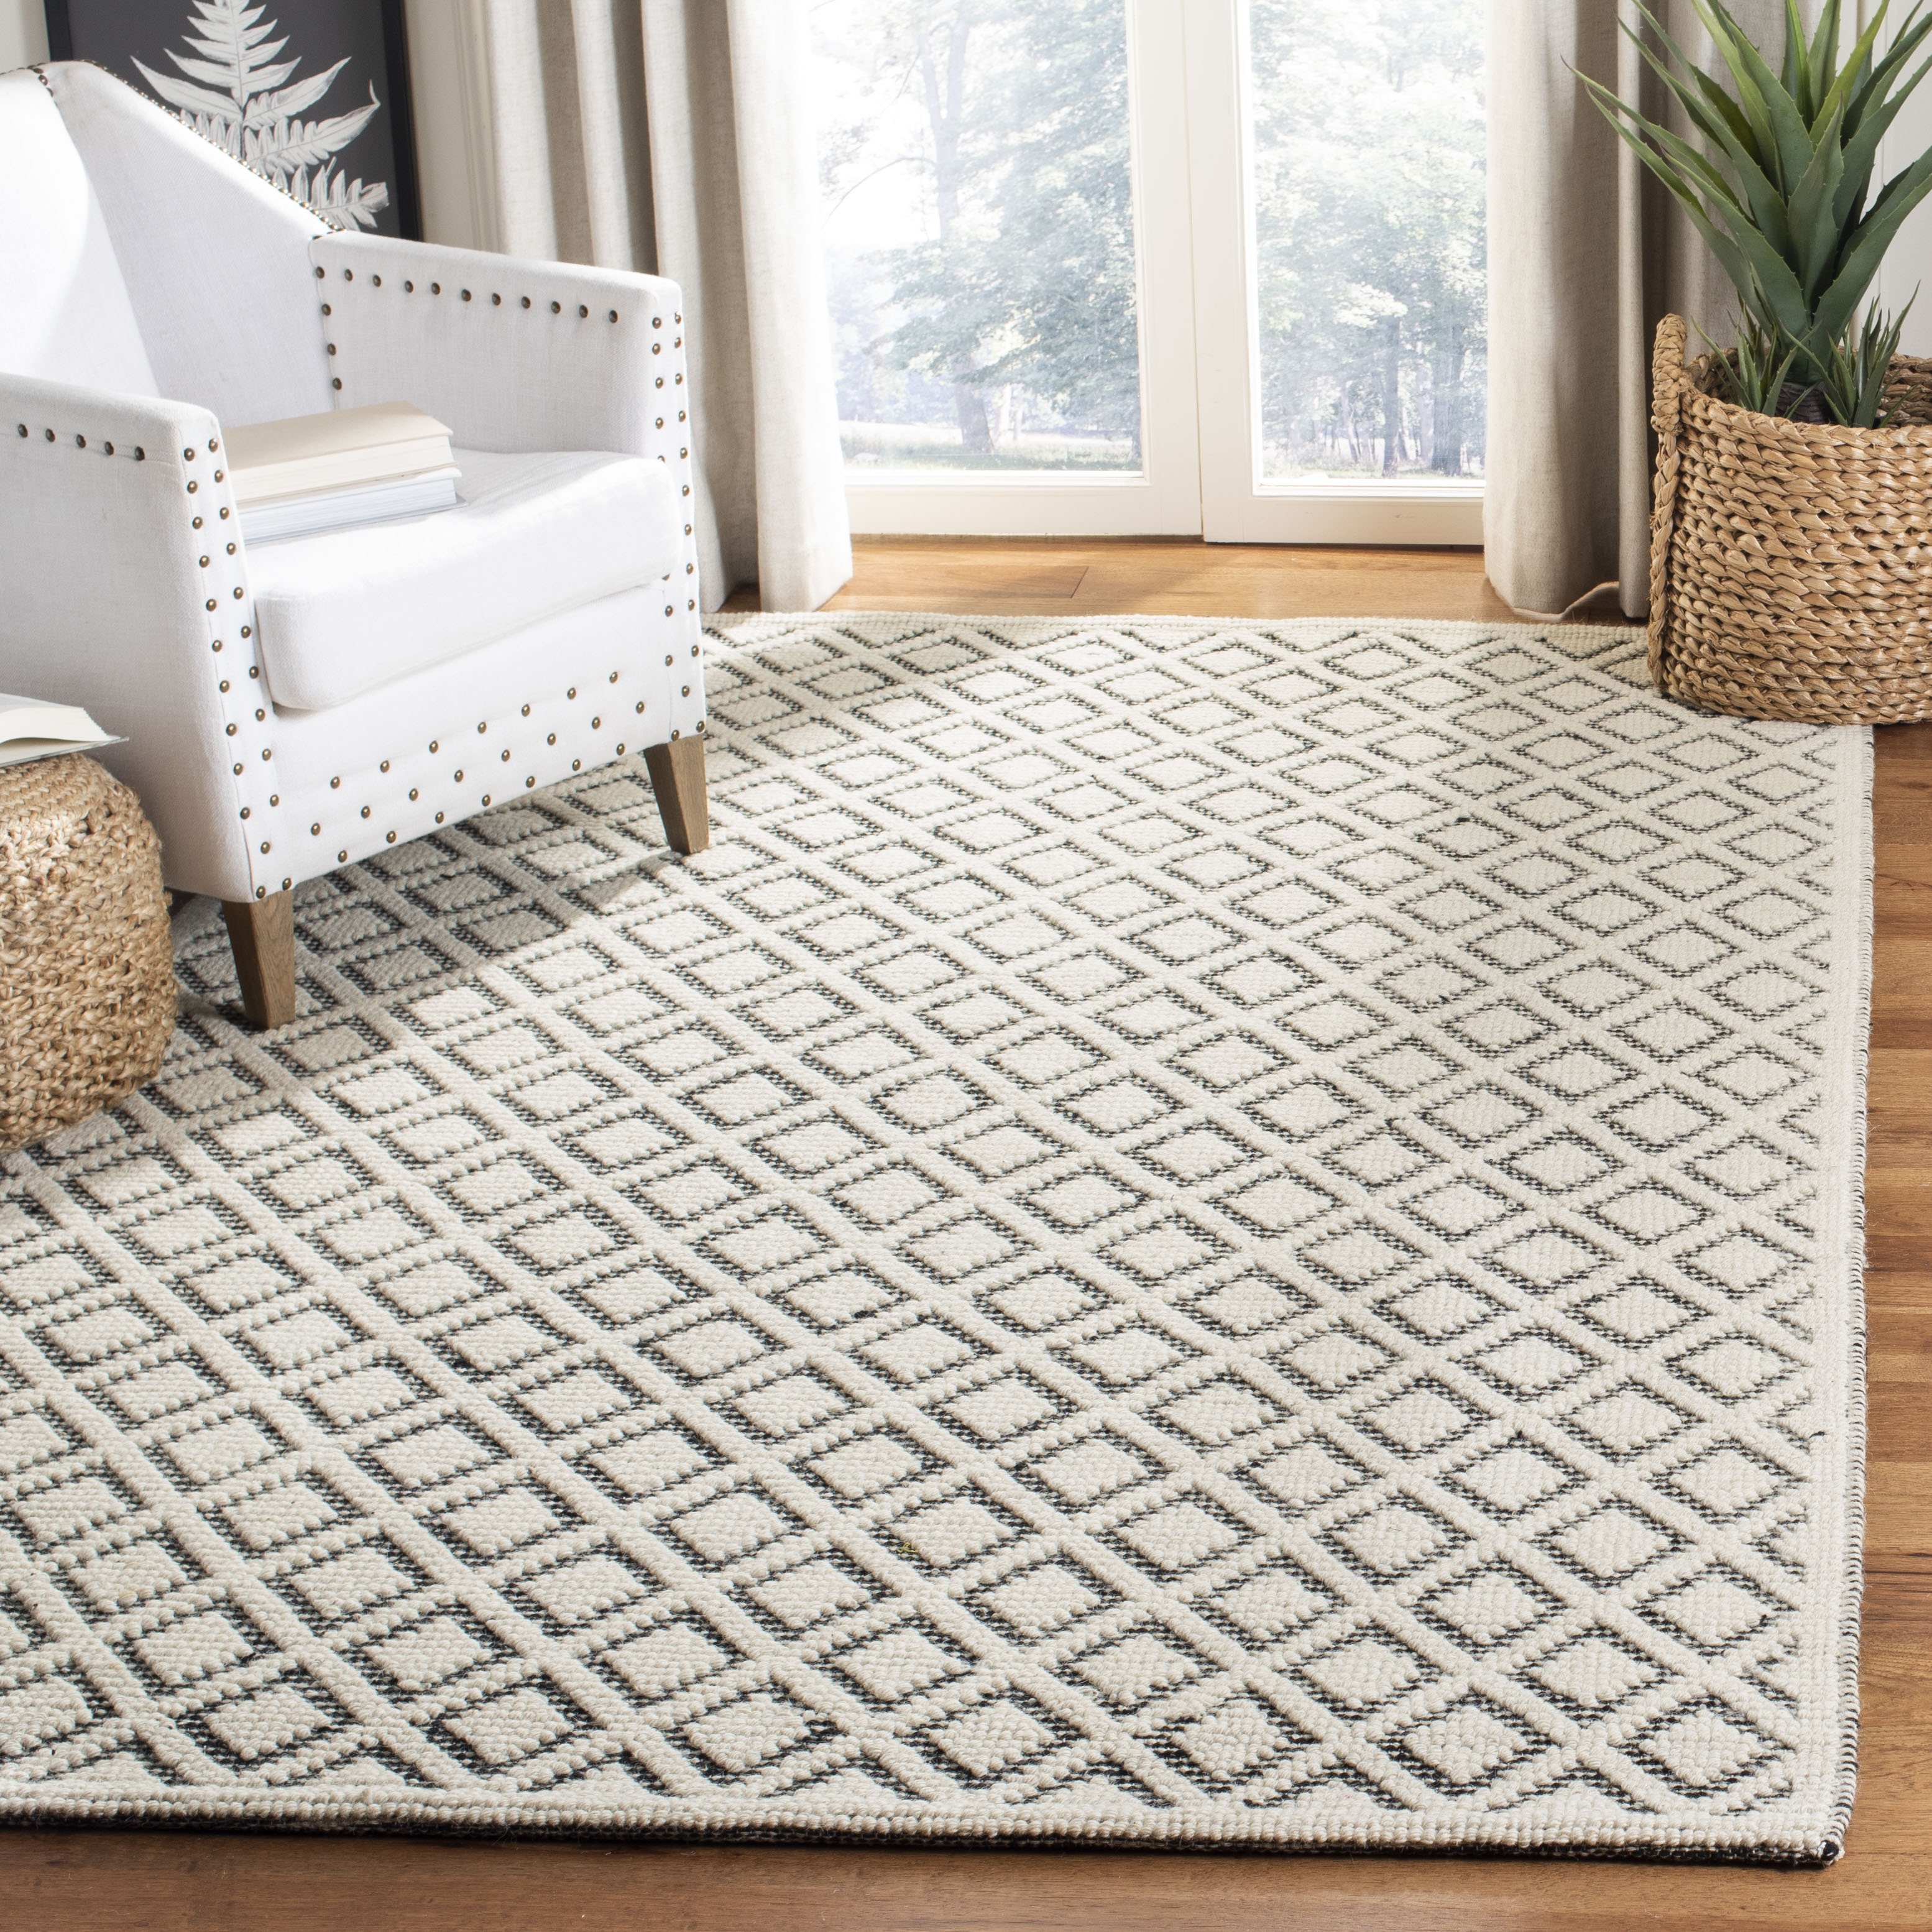 Arlo Home Hand Woven Area Rug, VRM304Z, Ivory/Black,  3' X 5' - Image 1